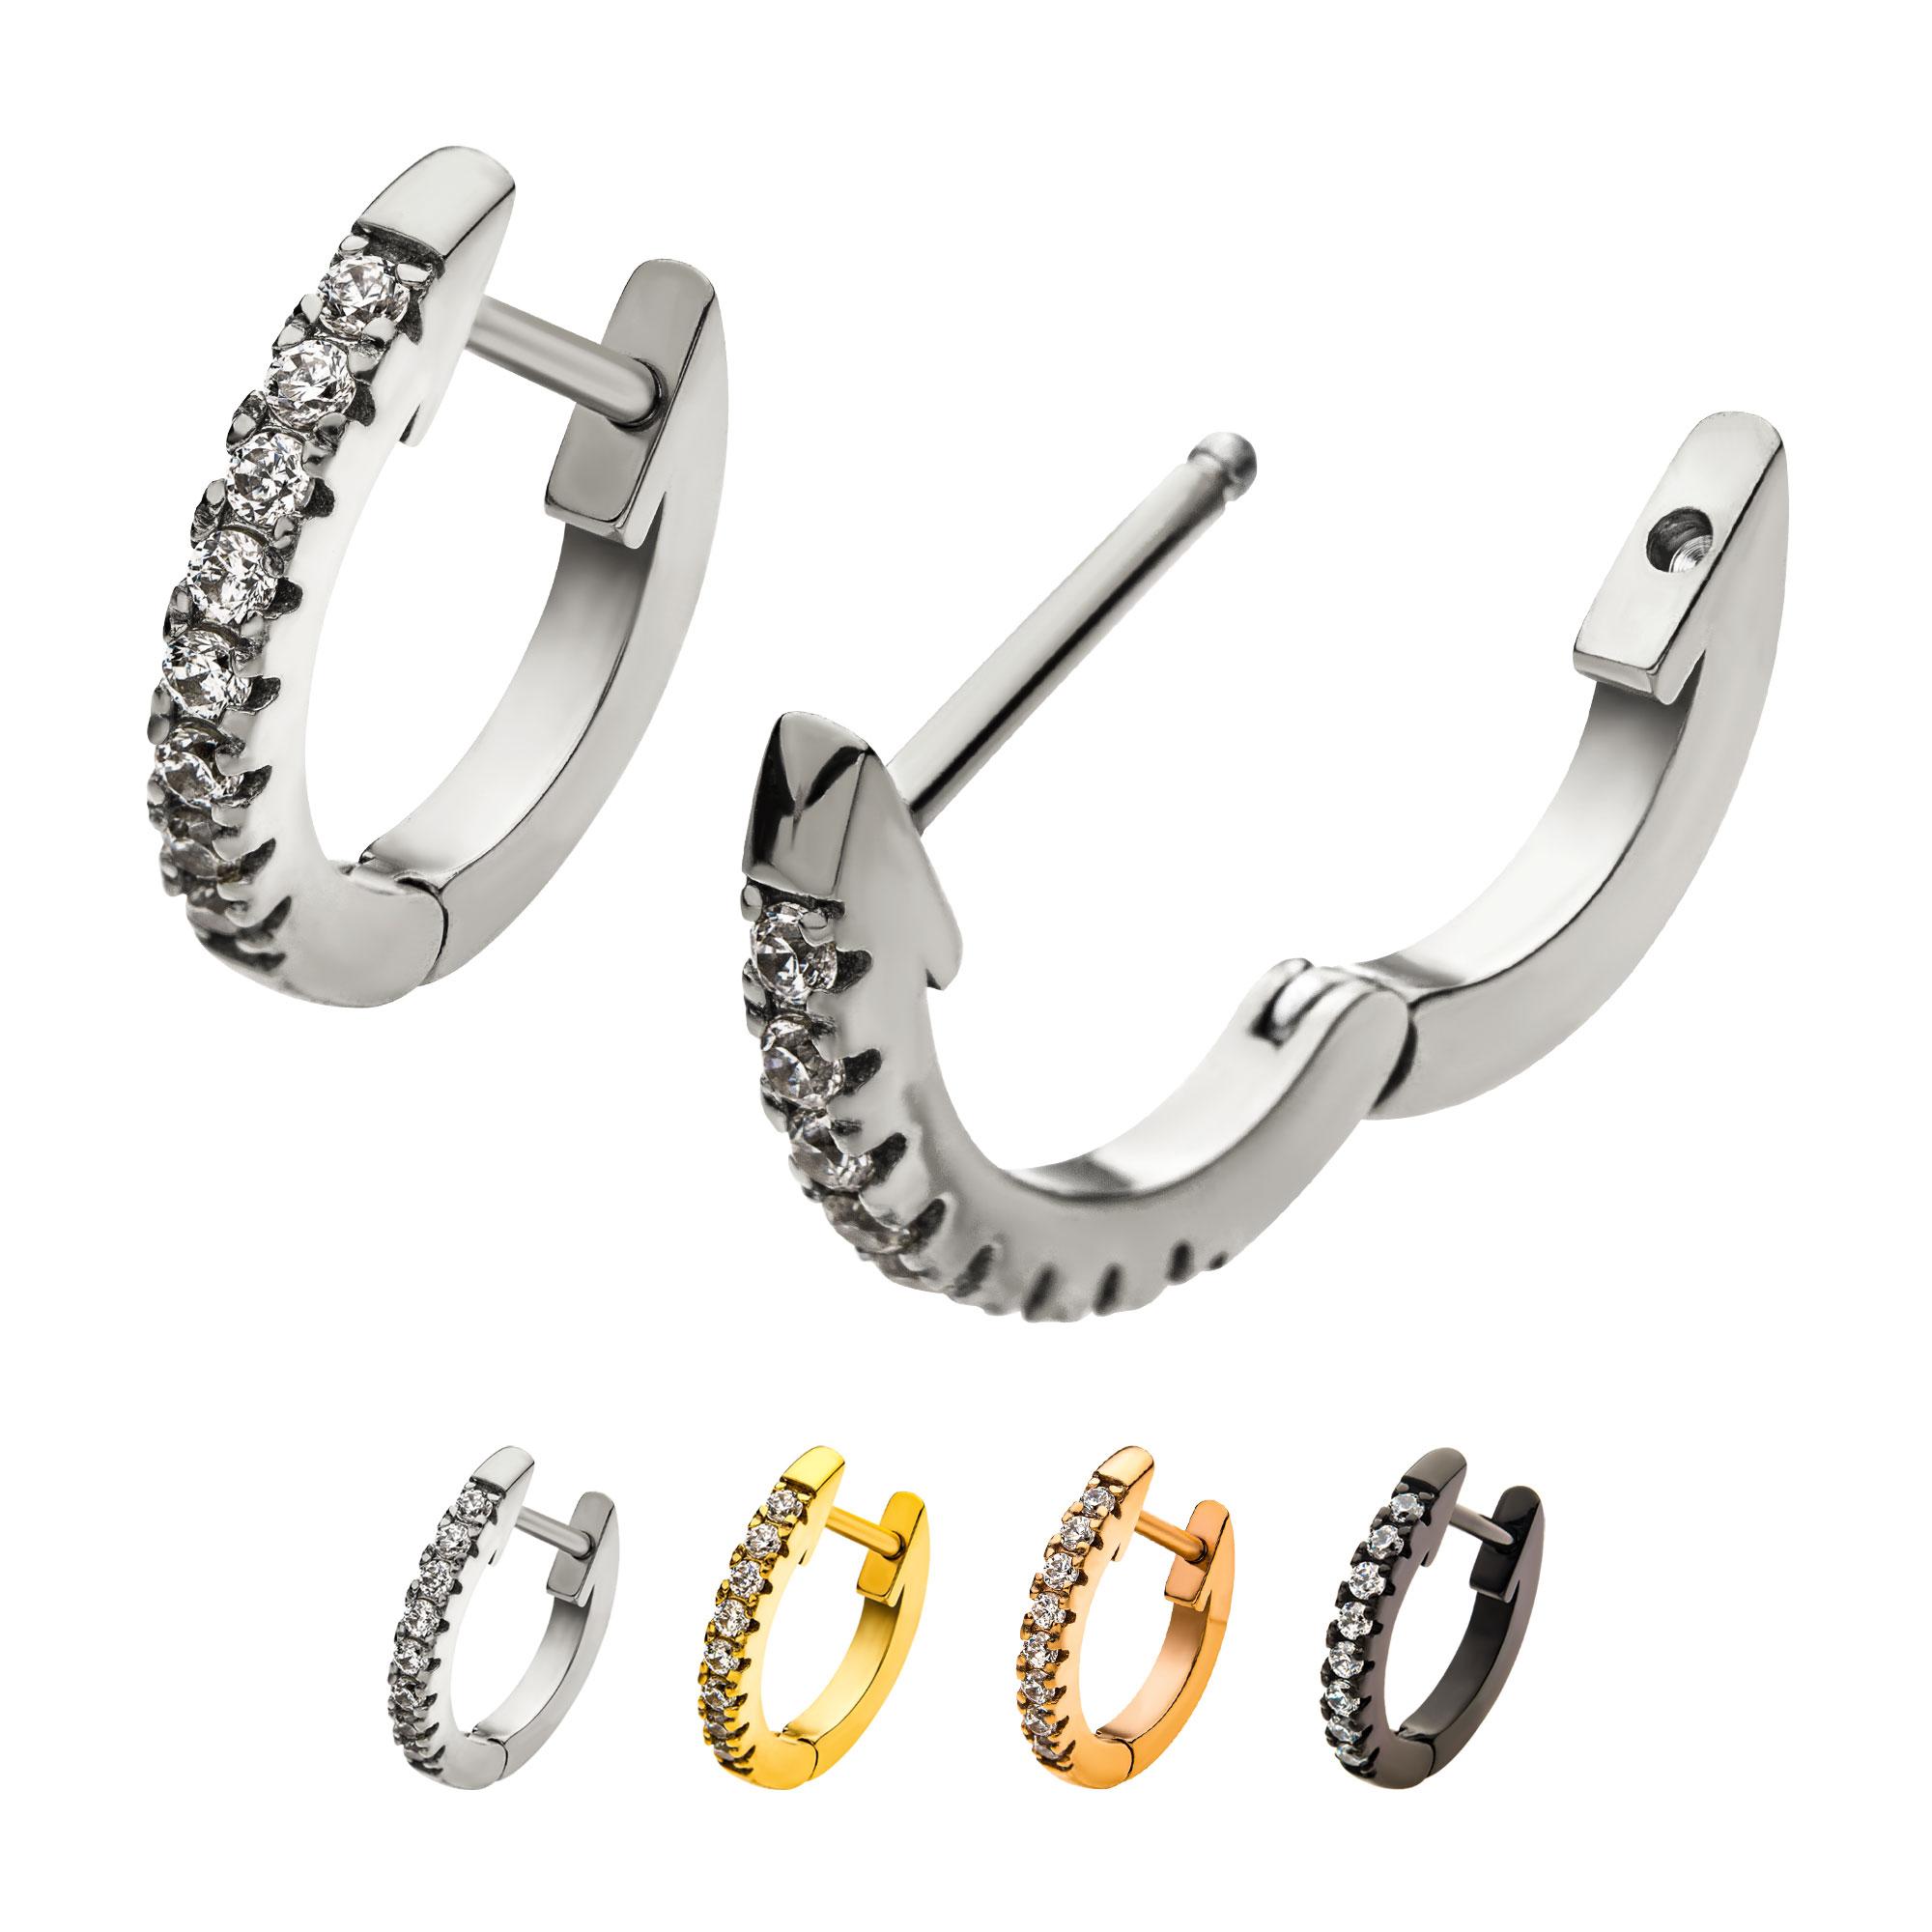 Stainless Steel with Prong Set 9pcs Clear AAA CZ Huggie Earrings Lewis Jewelers, Inc. Ansonia, CT